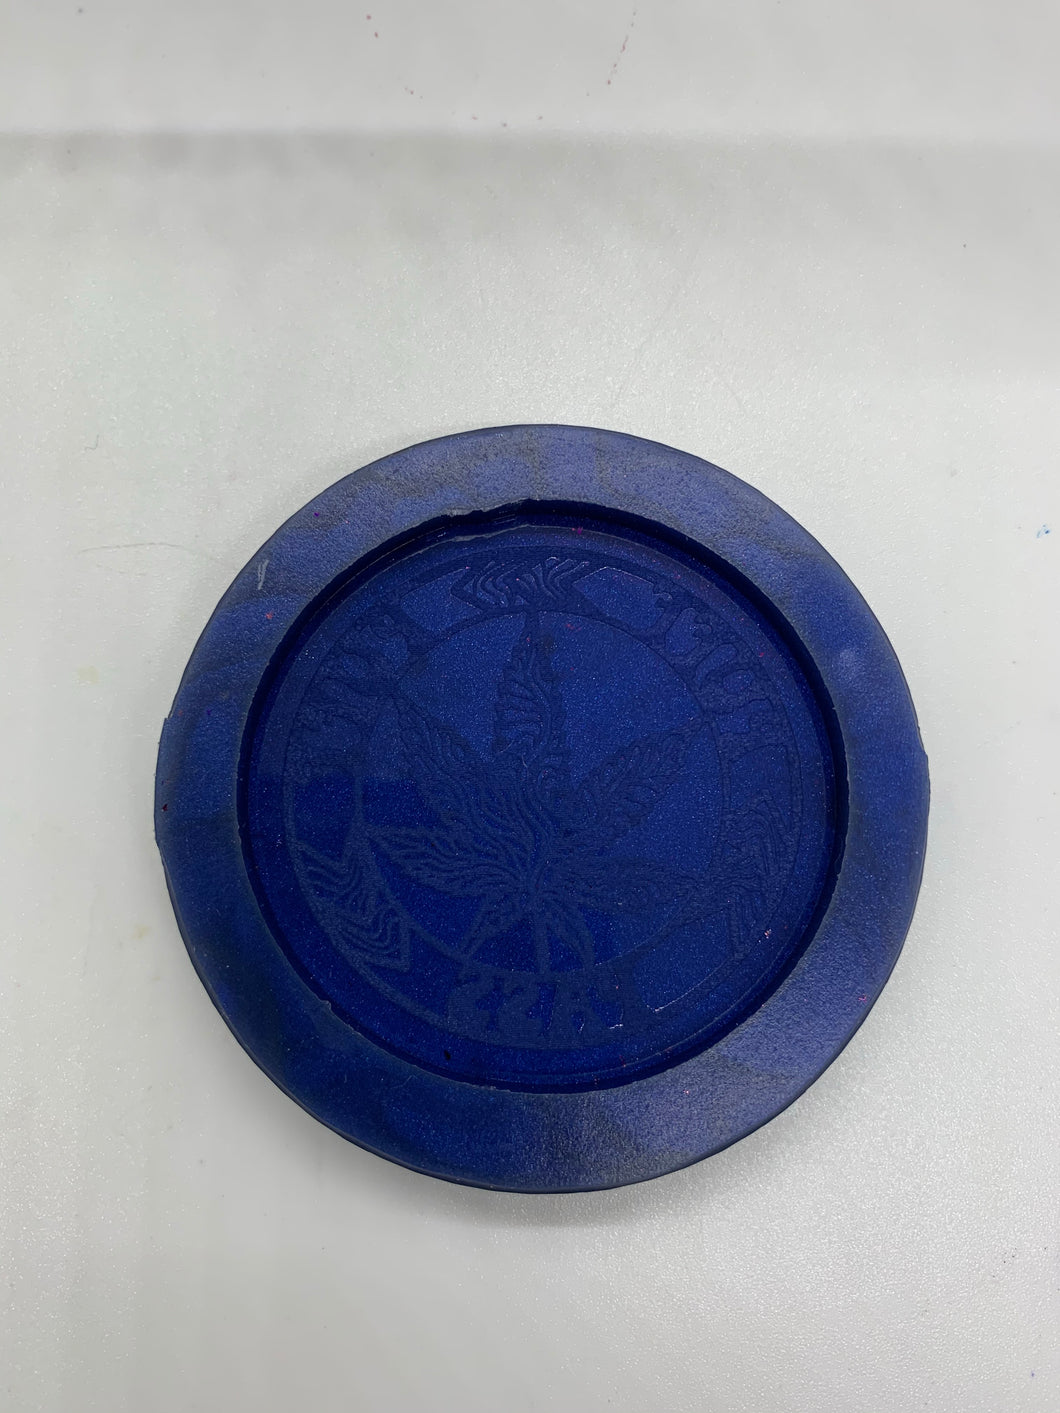 Puff Puff Pass KeyChain Silicone Mold